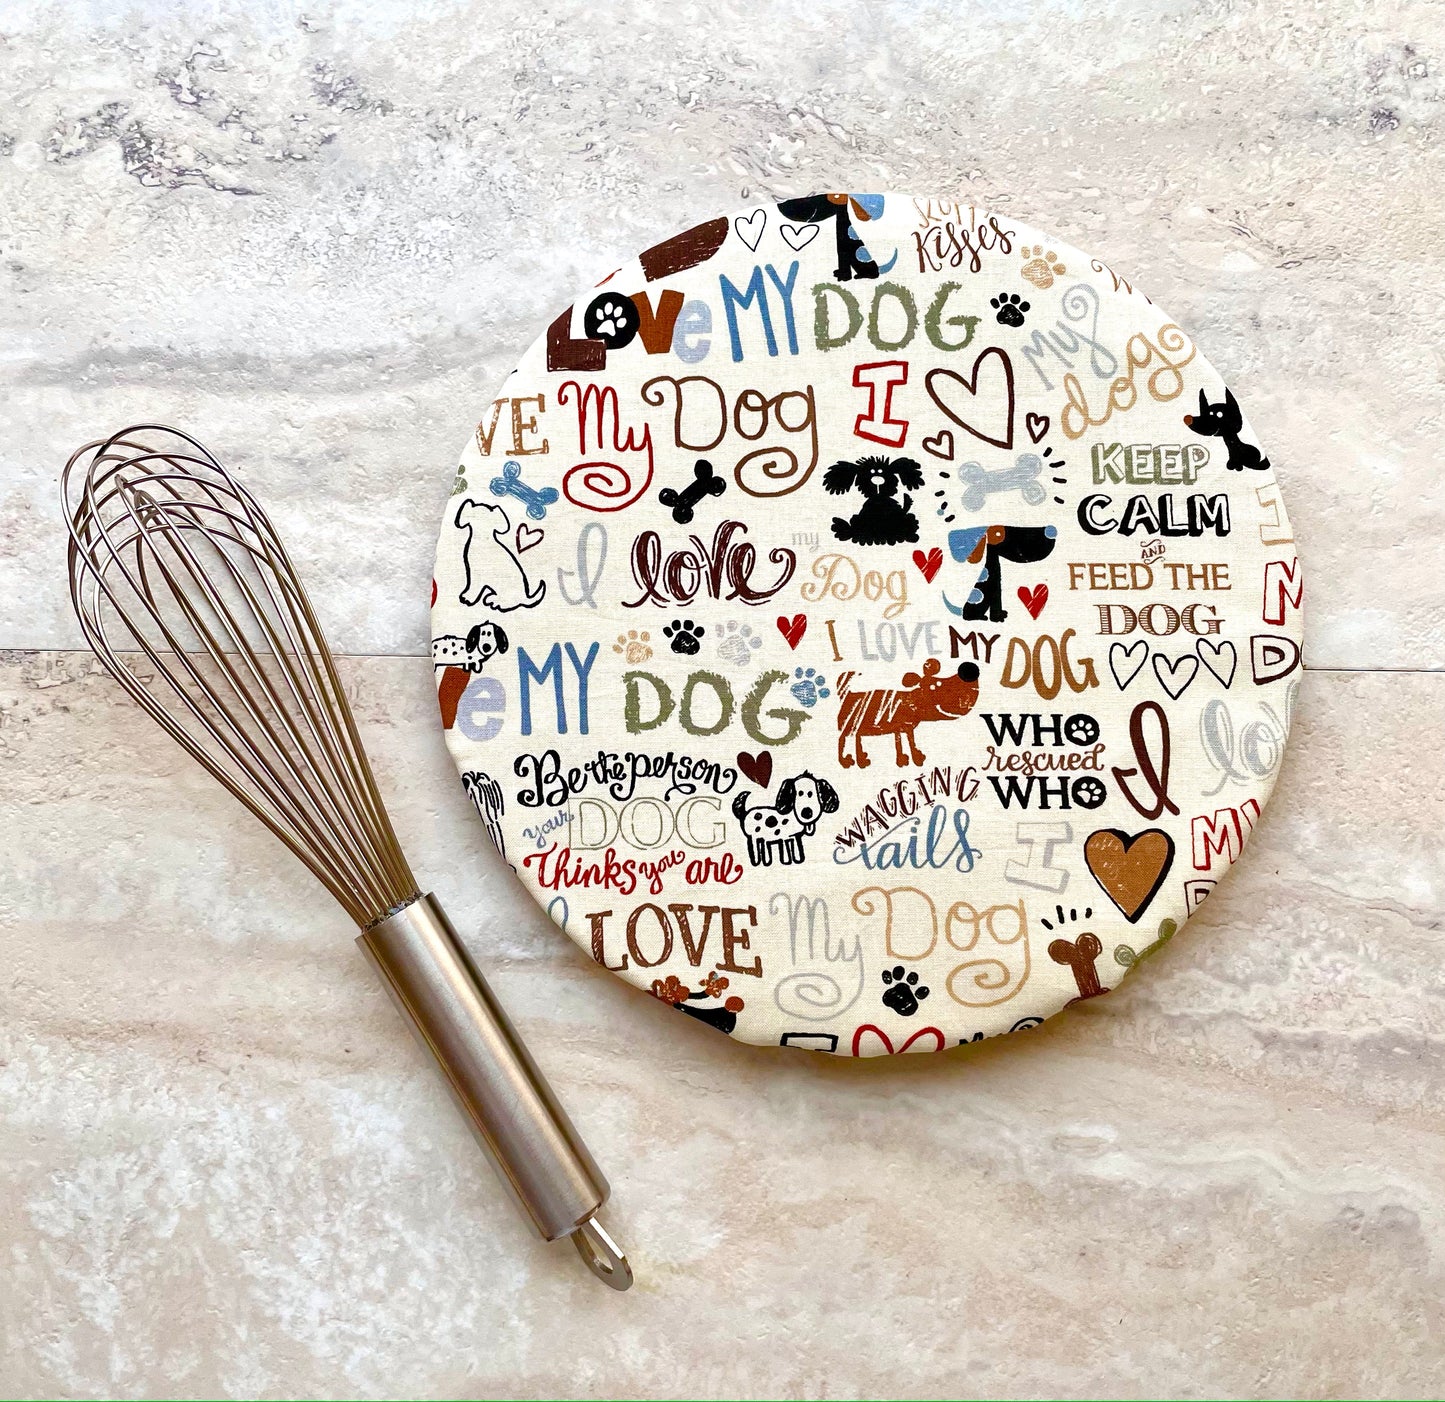 Love My Dog Fabric Bowl Cover